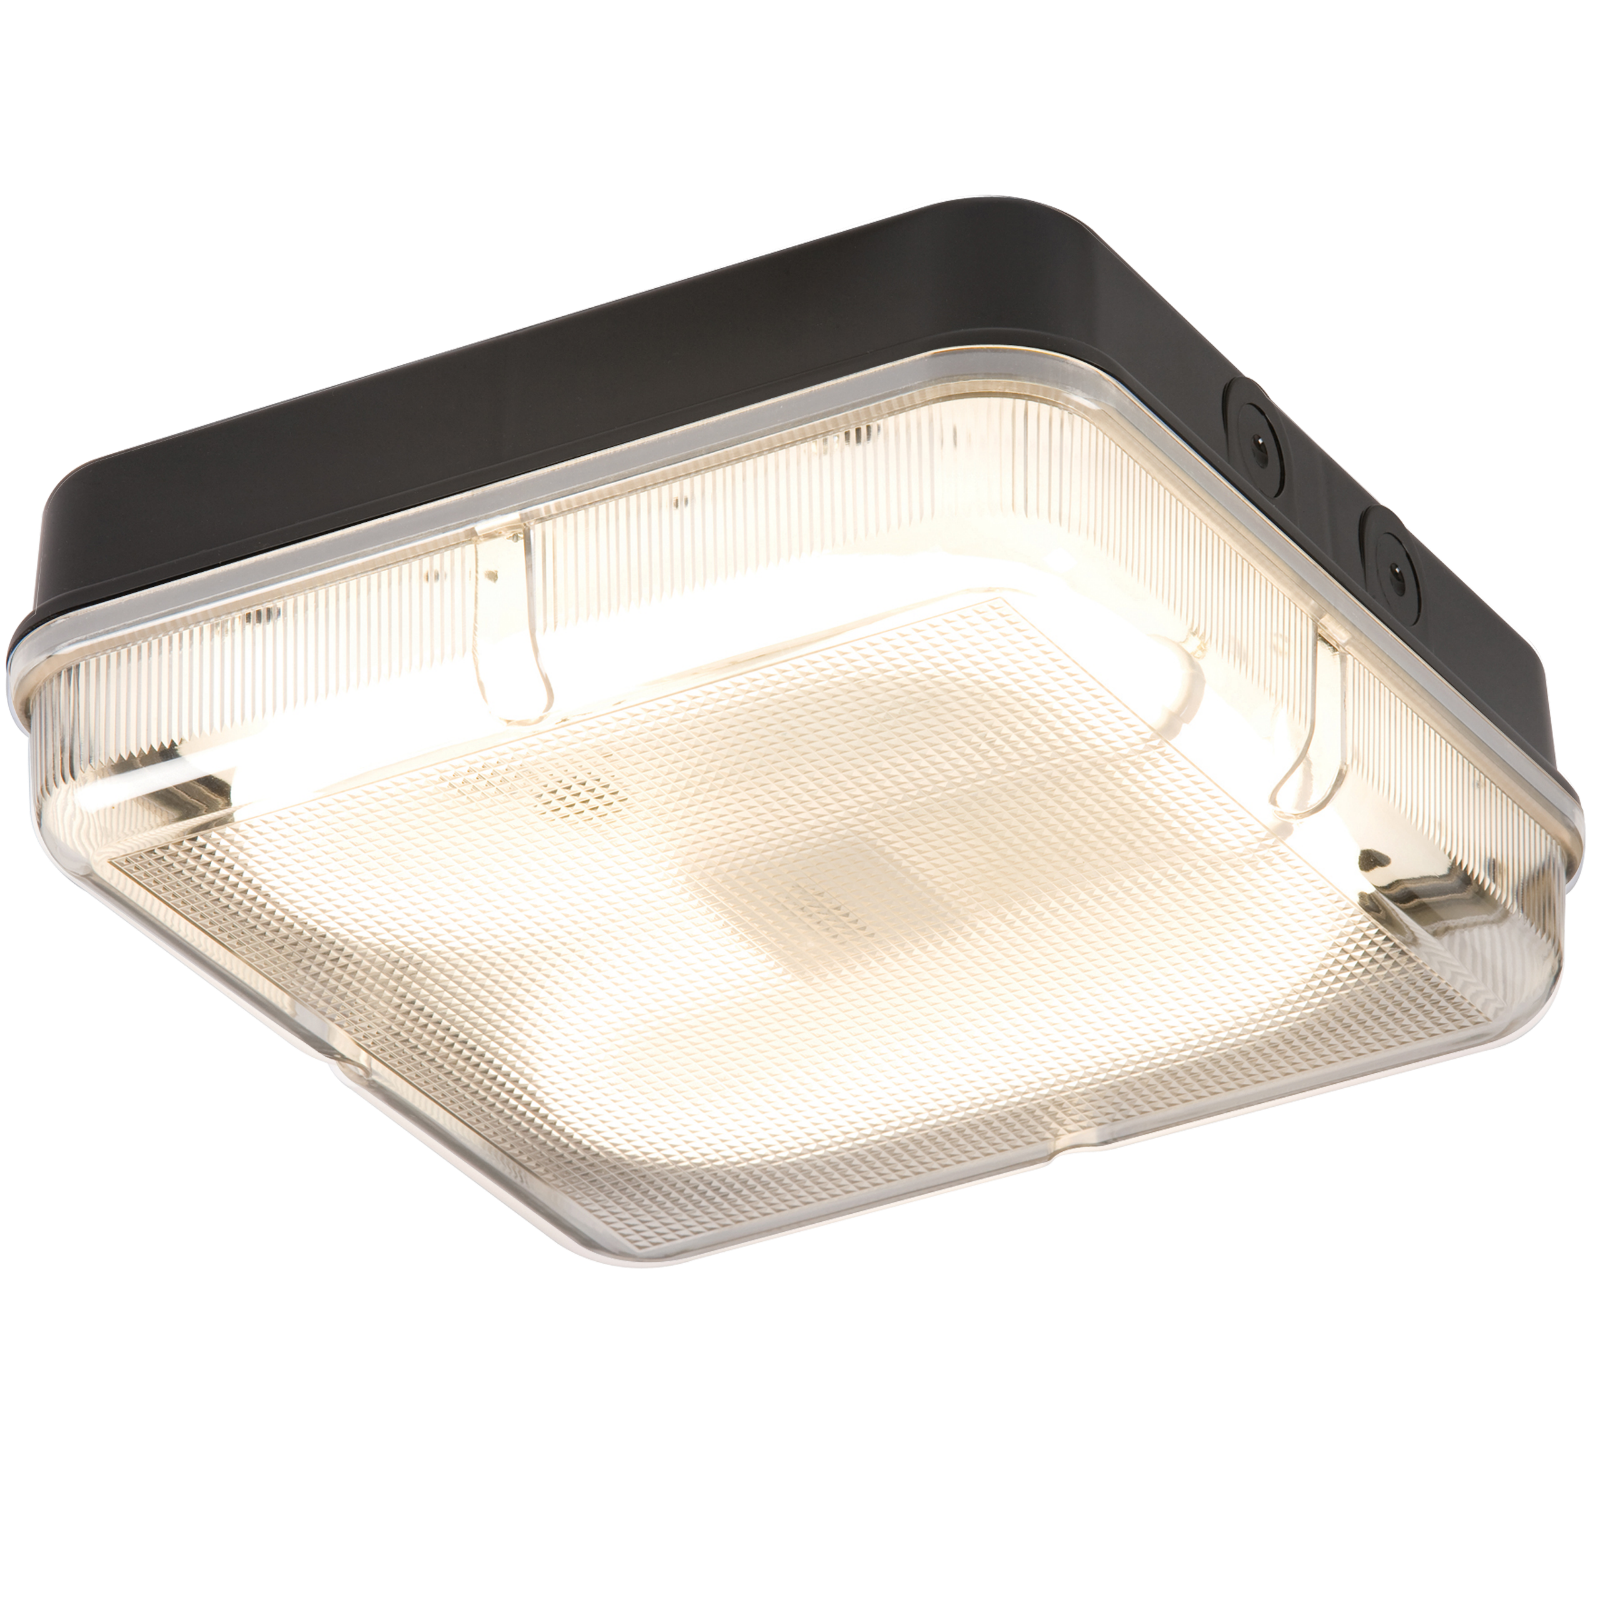 IP65 28W HF Square Bulkhead With Prismatic Diffuser And Black Base - TPS28BPHF 